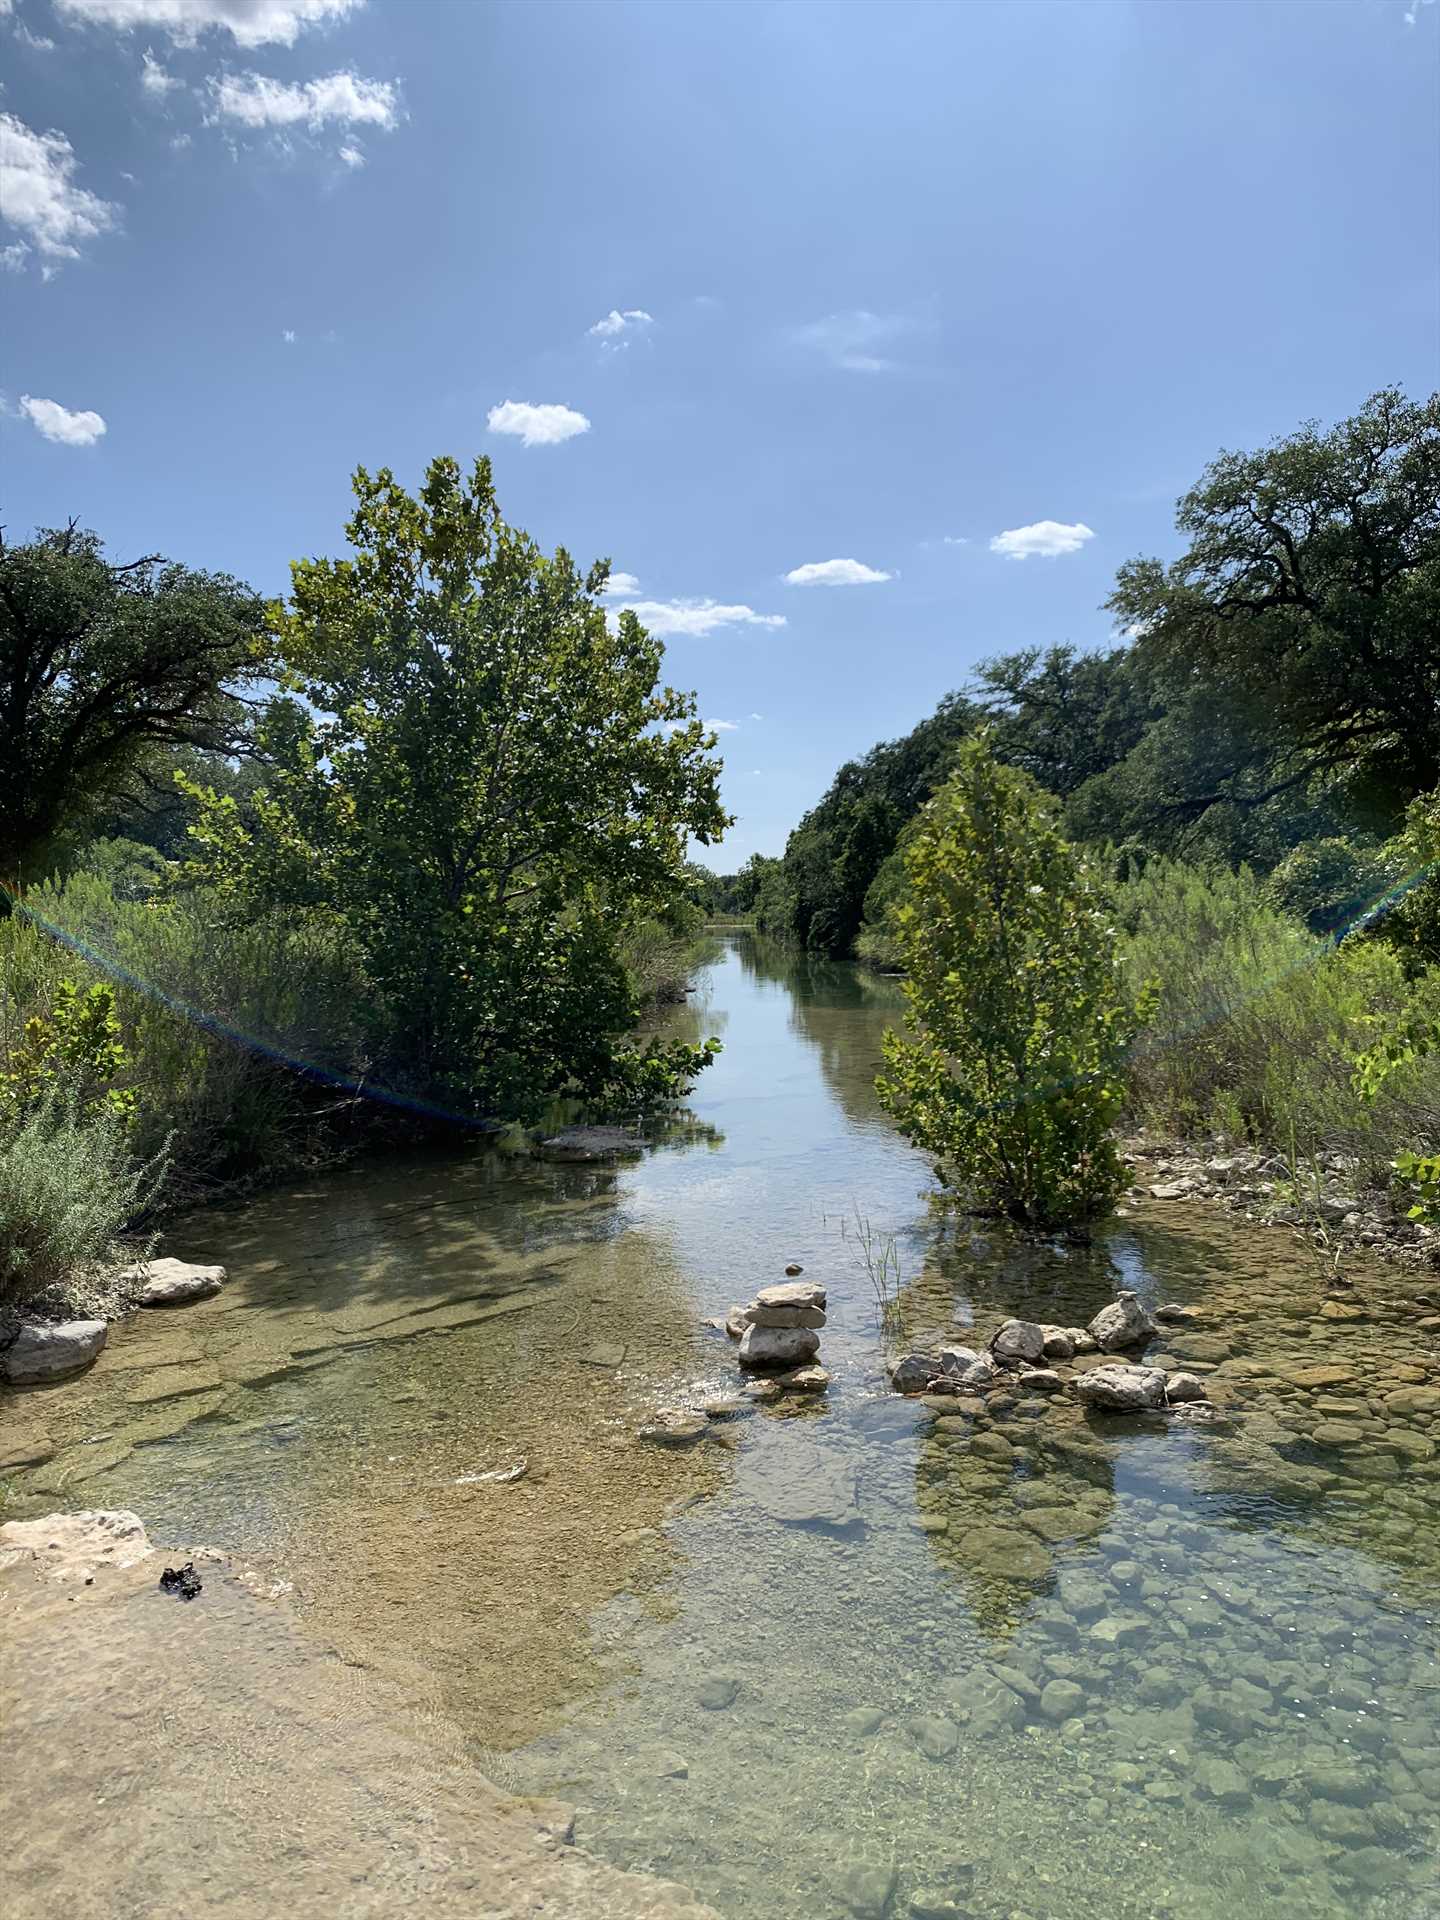                                                 Feel free to hike the 16 acres of property here, including the peaceful banks of a bubbling creek.